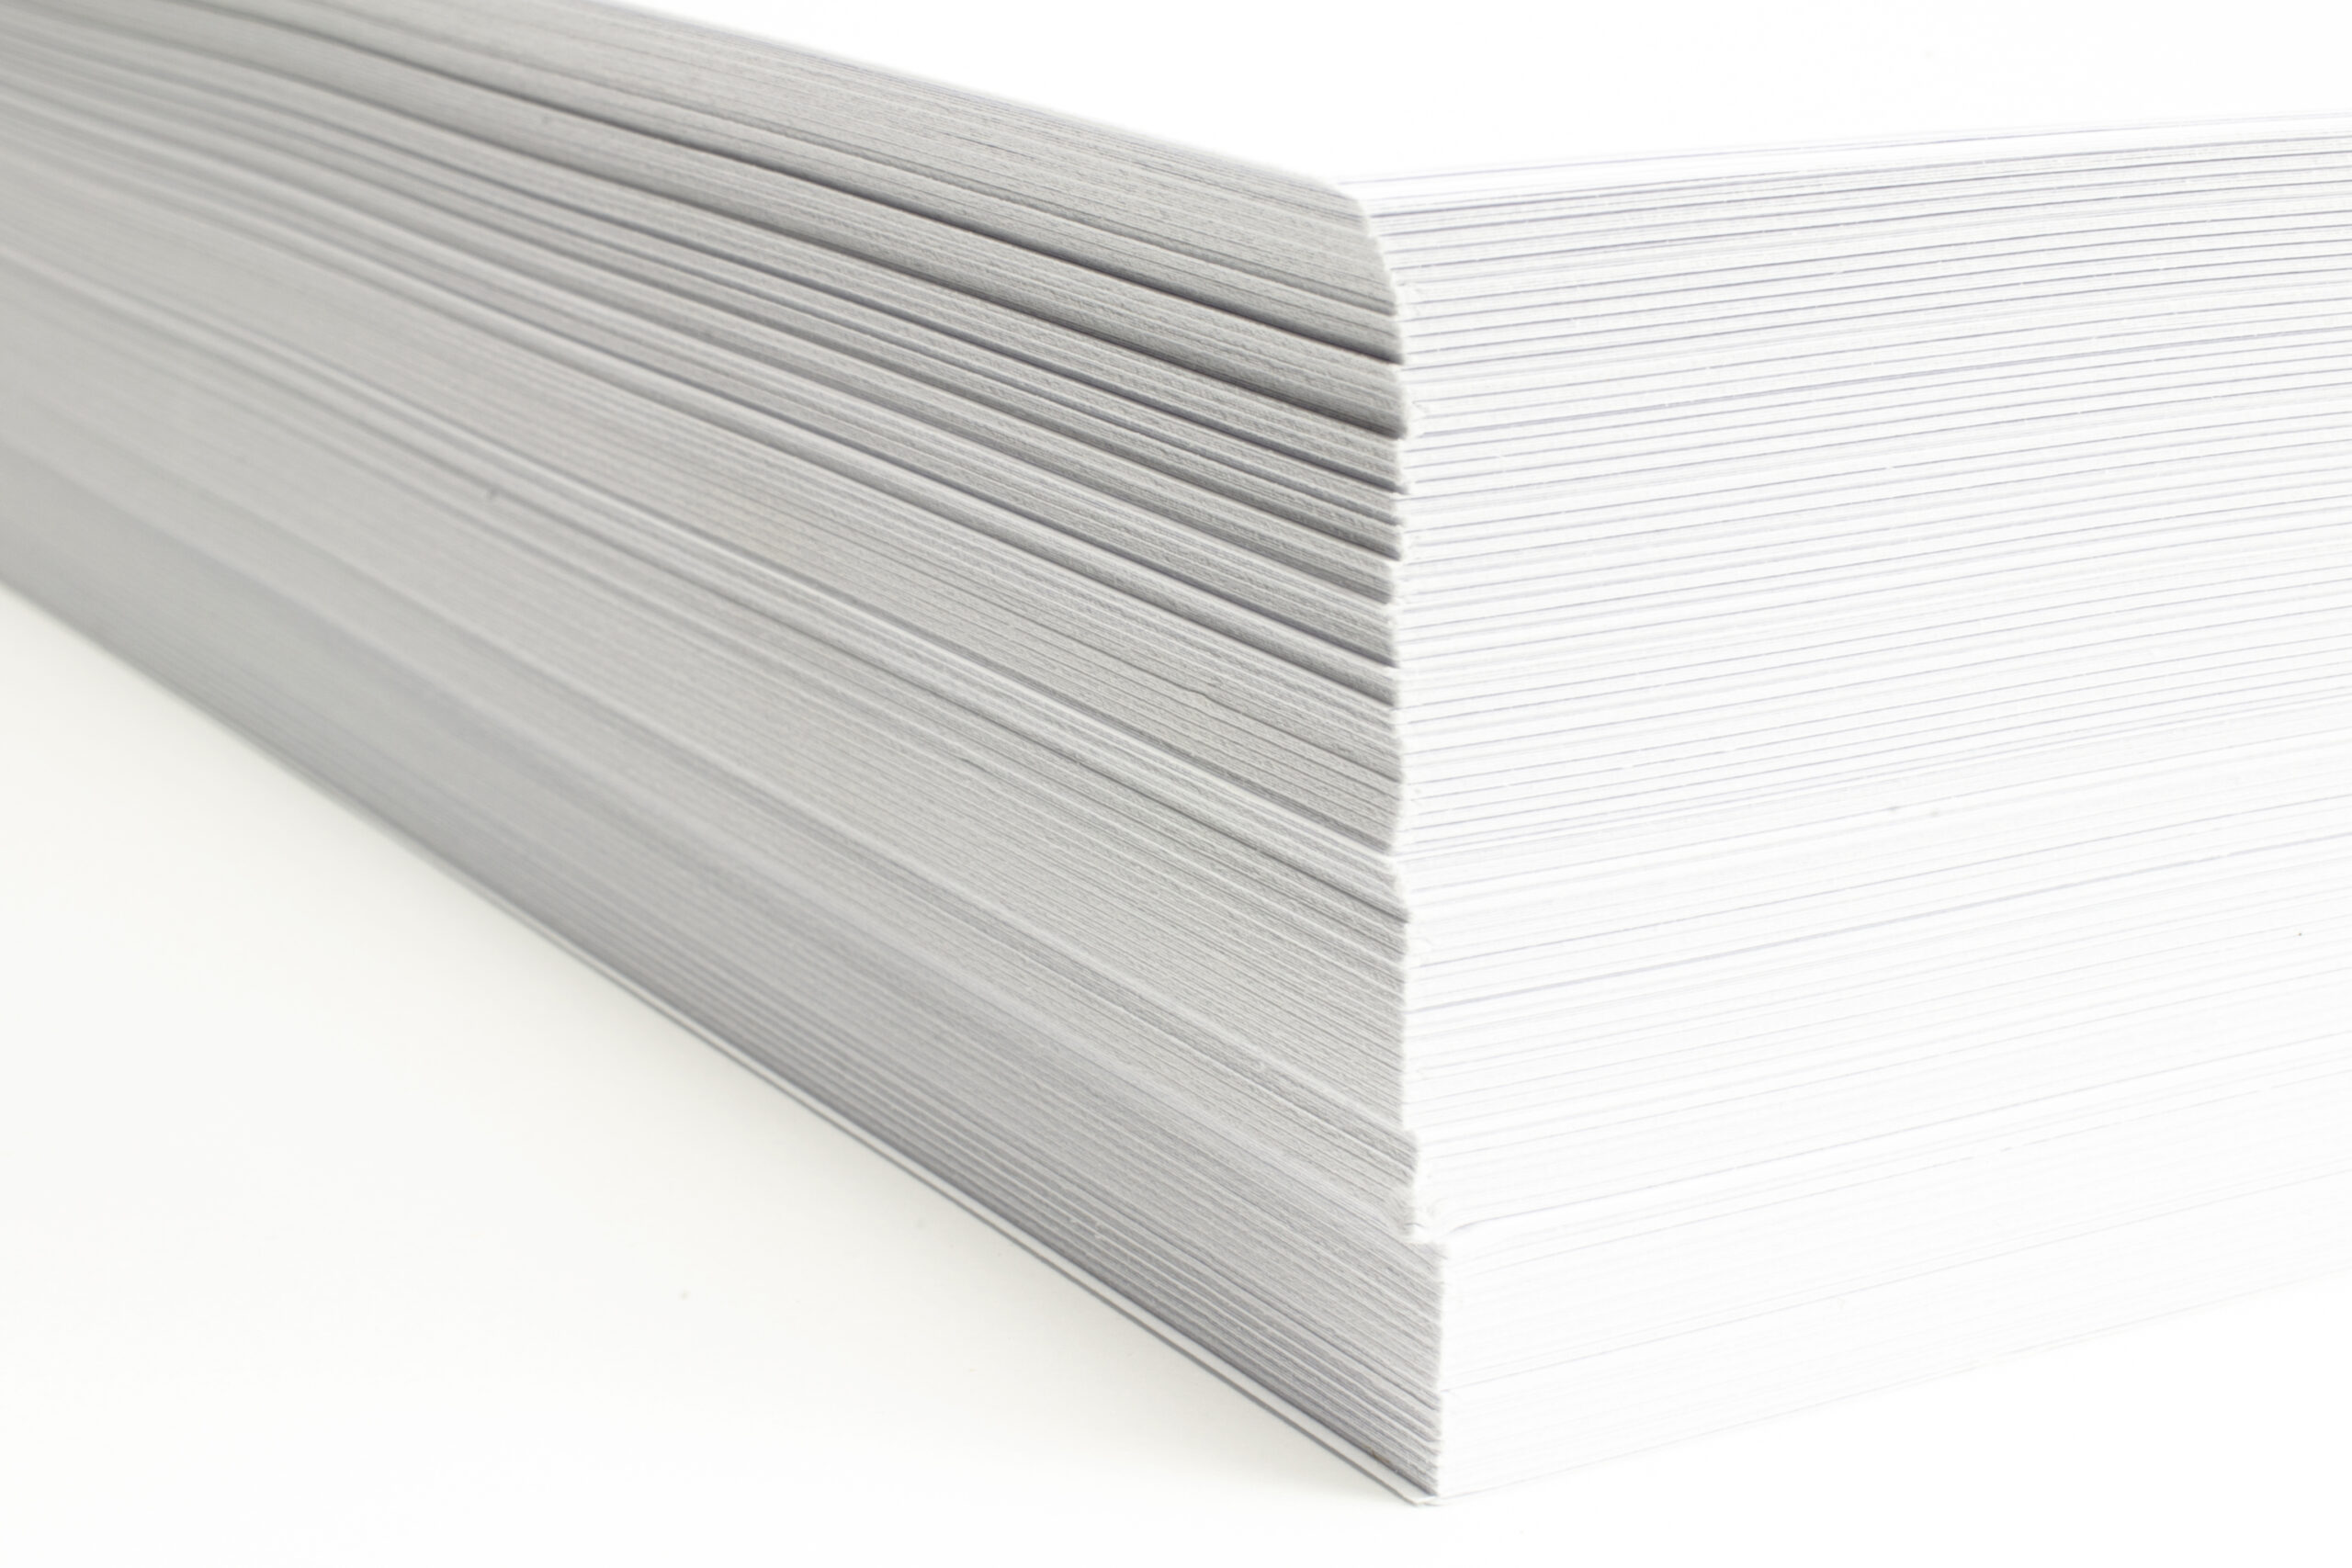 Blank ar letterheads stack macro view with selective focus on wh